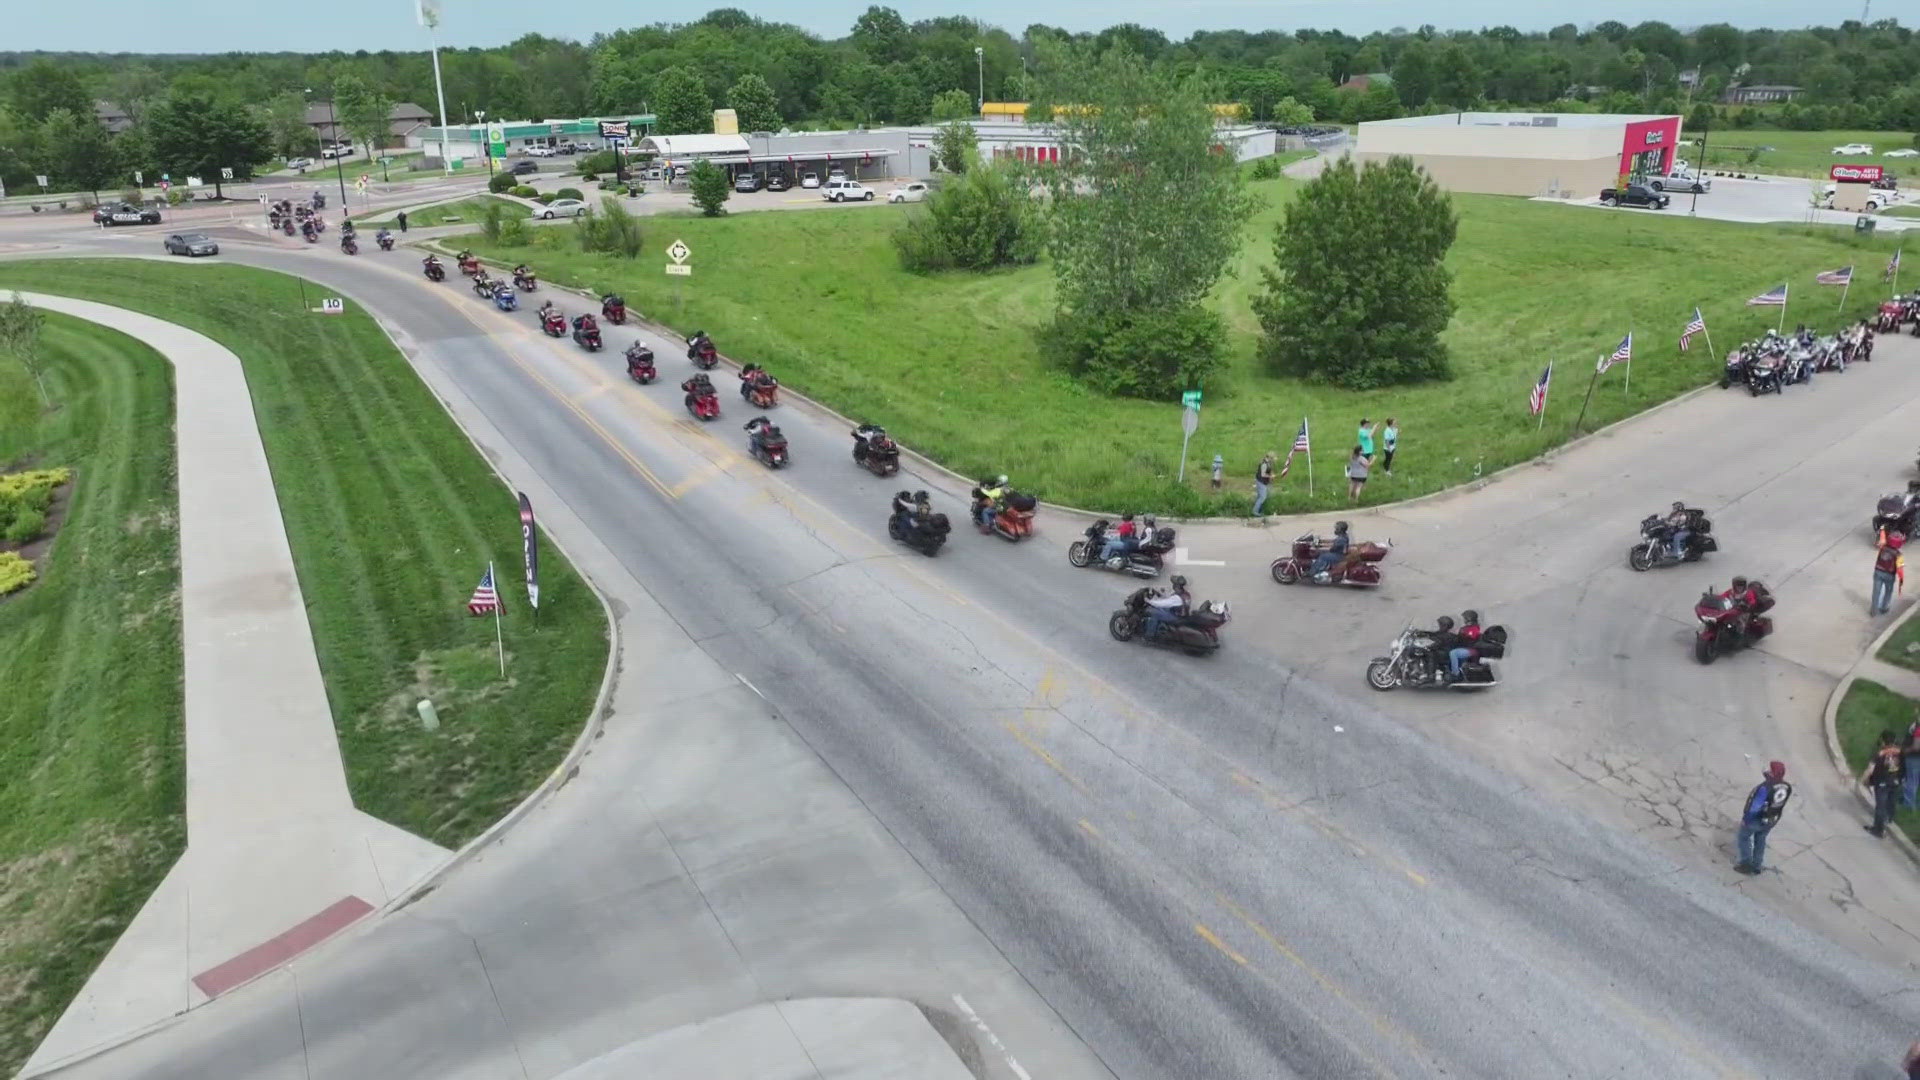 Hundreds of motorcycle riders are on a cross-country trip to honor the memory of all veterans. They made a pit stop in Wentzville on Wednesday.